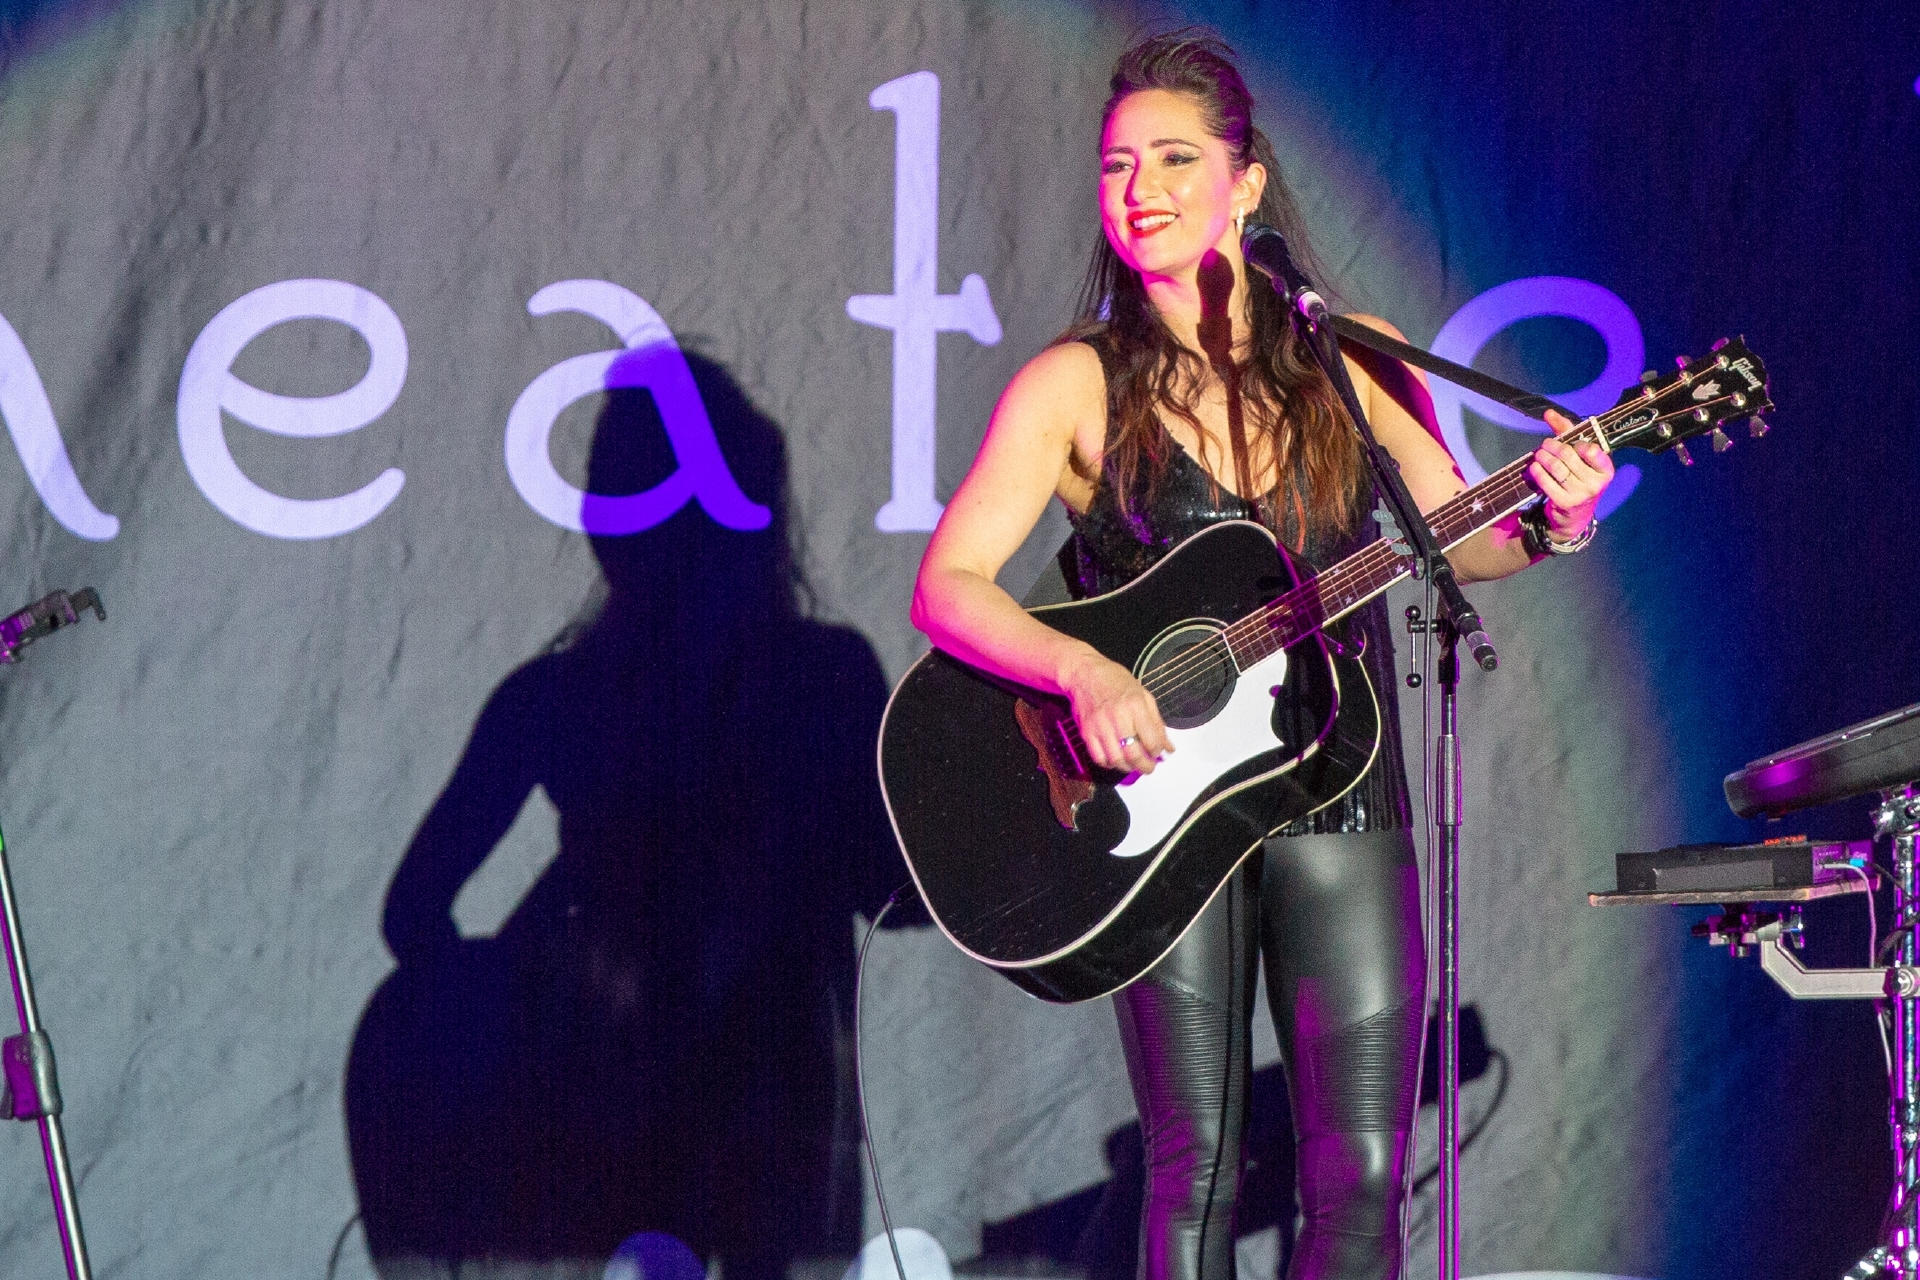 KT Tunstall opens for Gary Barlow at the Caird Hall in April 2018